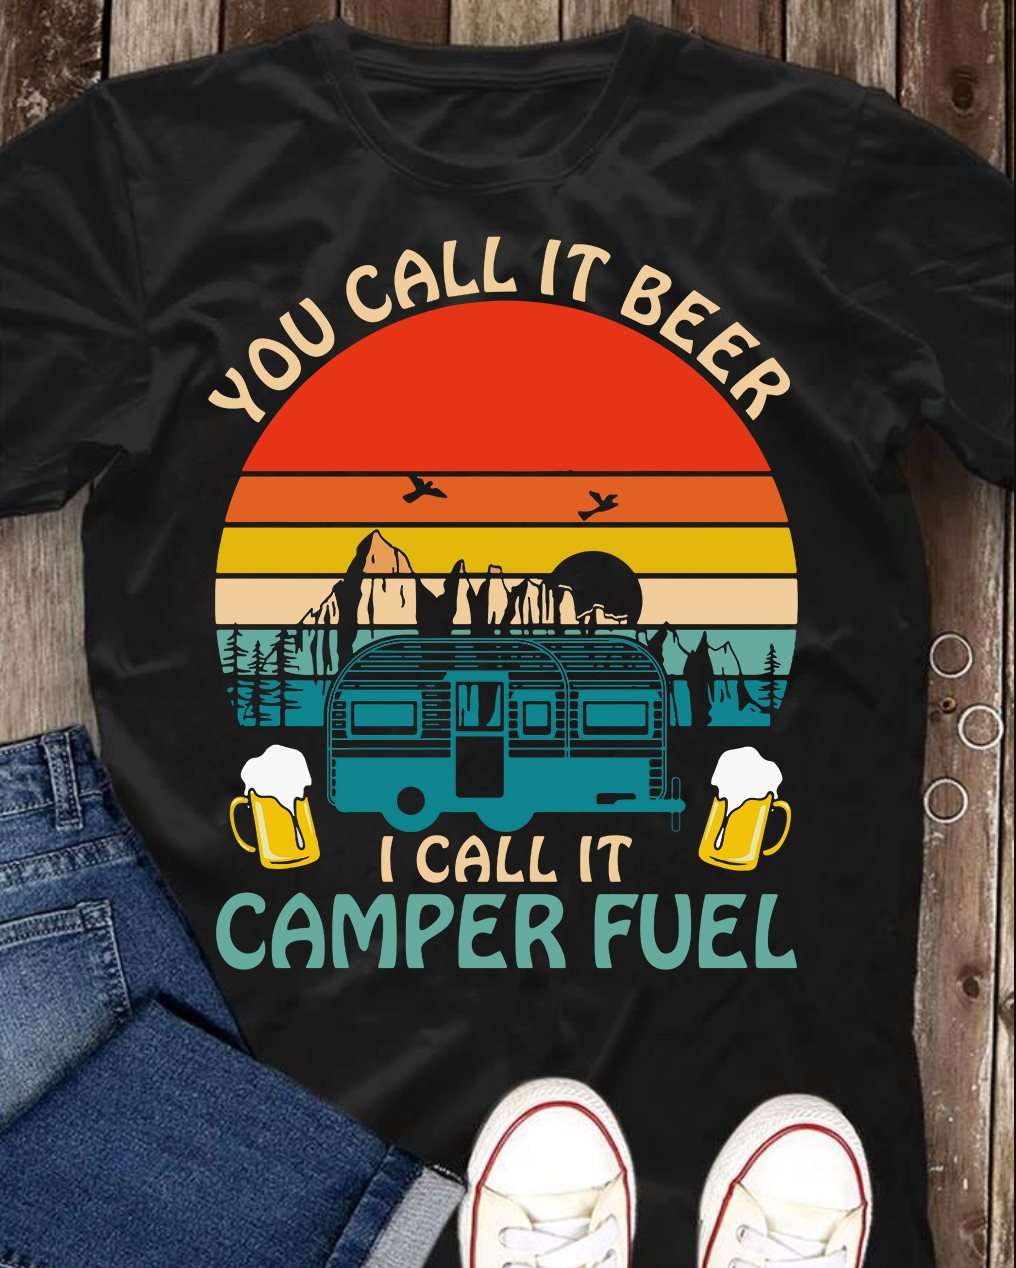 You call it beer I call it camper fuel - Drinking while camping